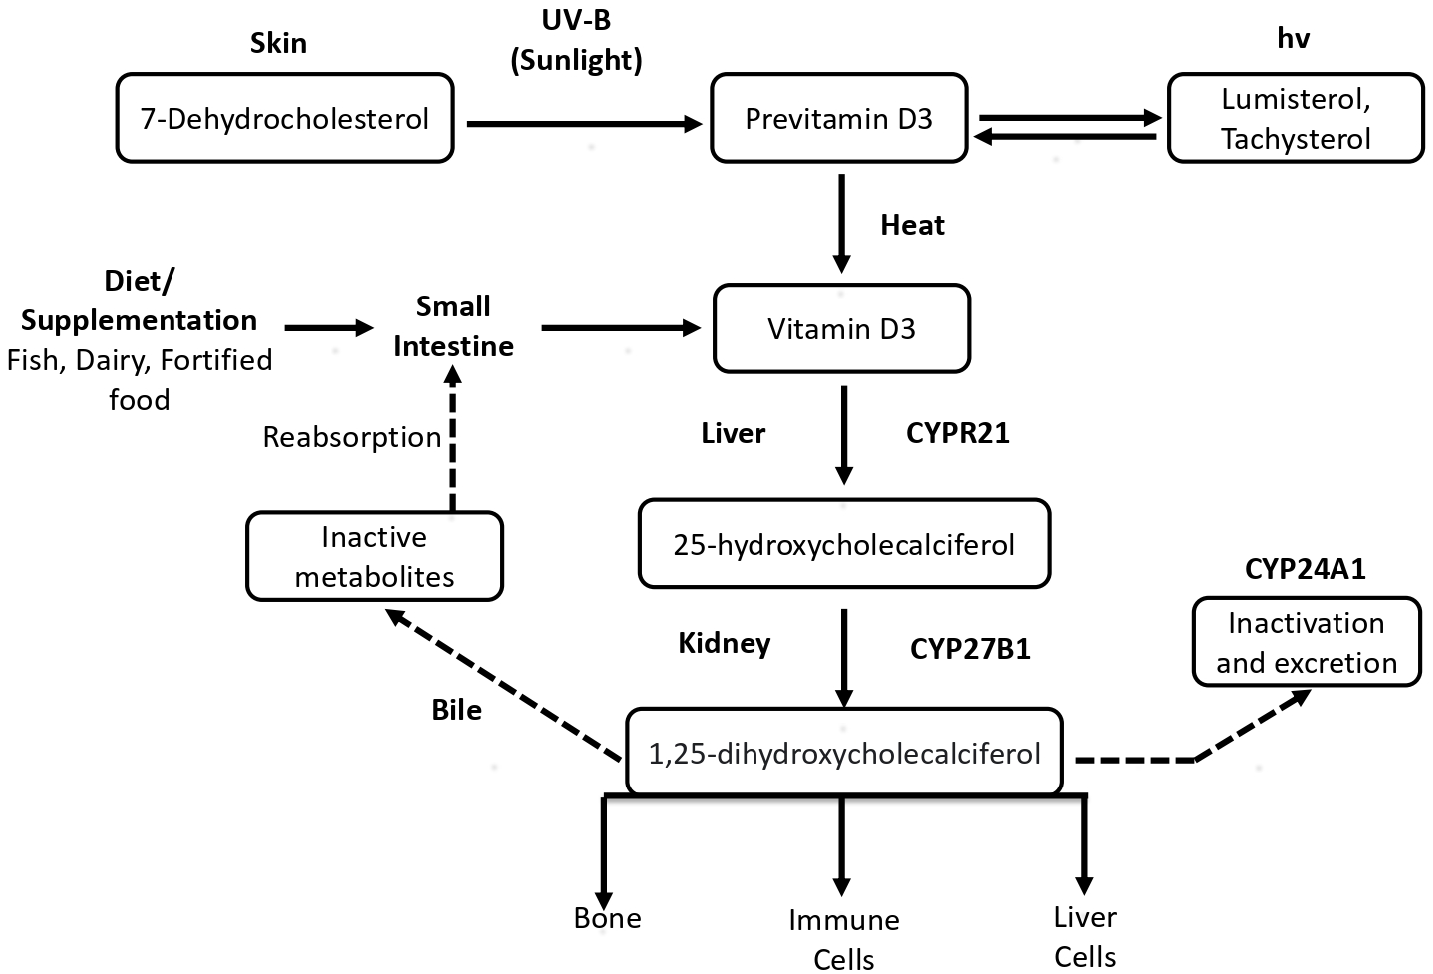 Endogenous synthesis of vitamin D and its metabolism